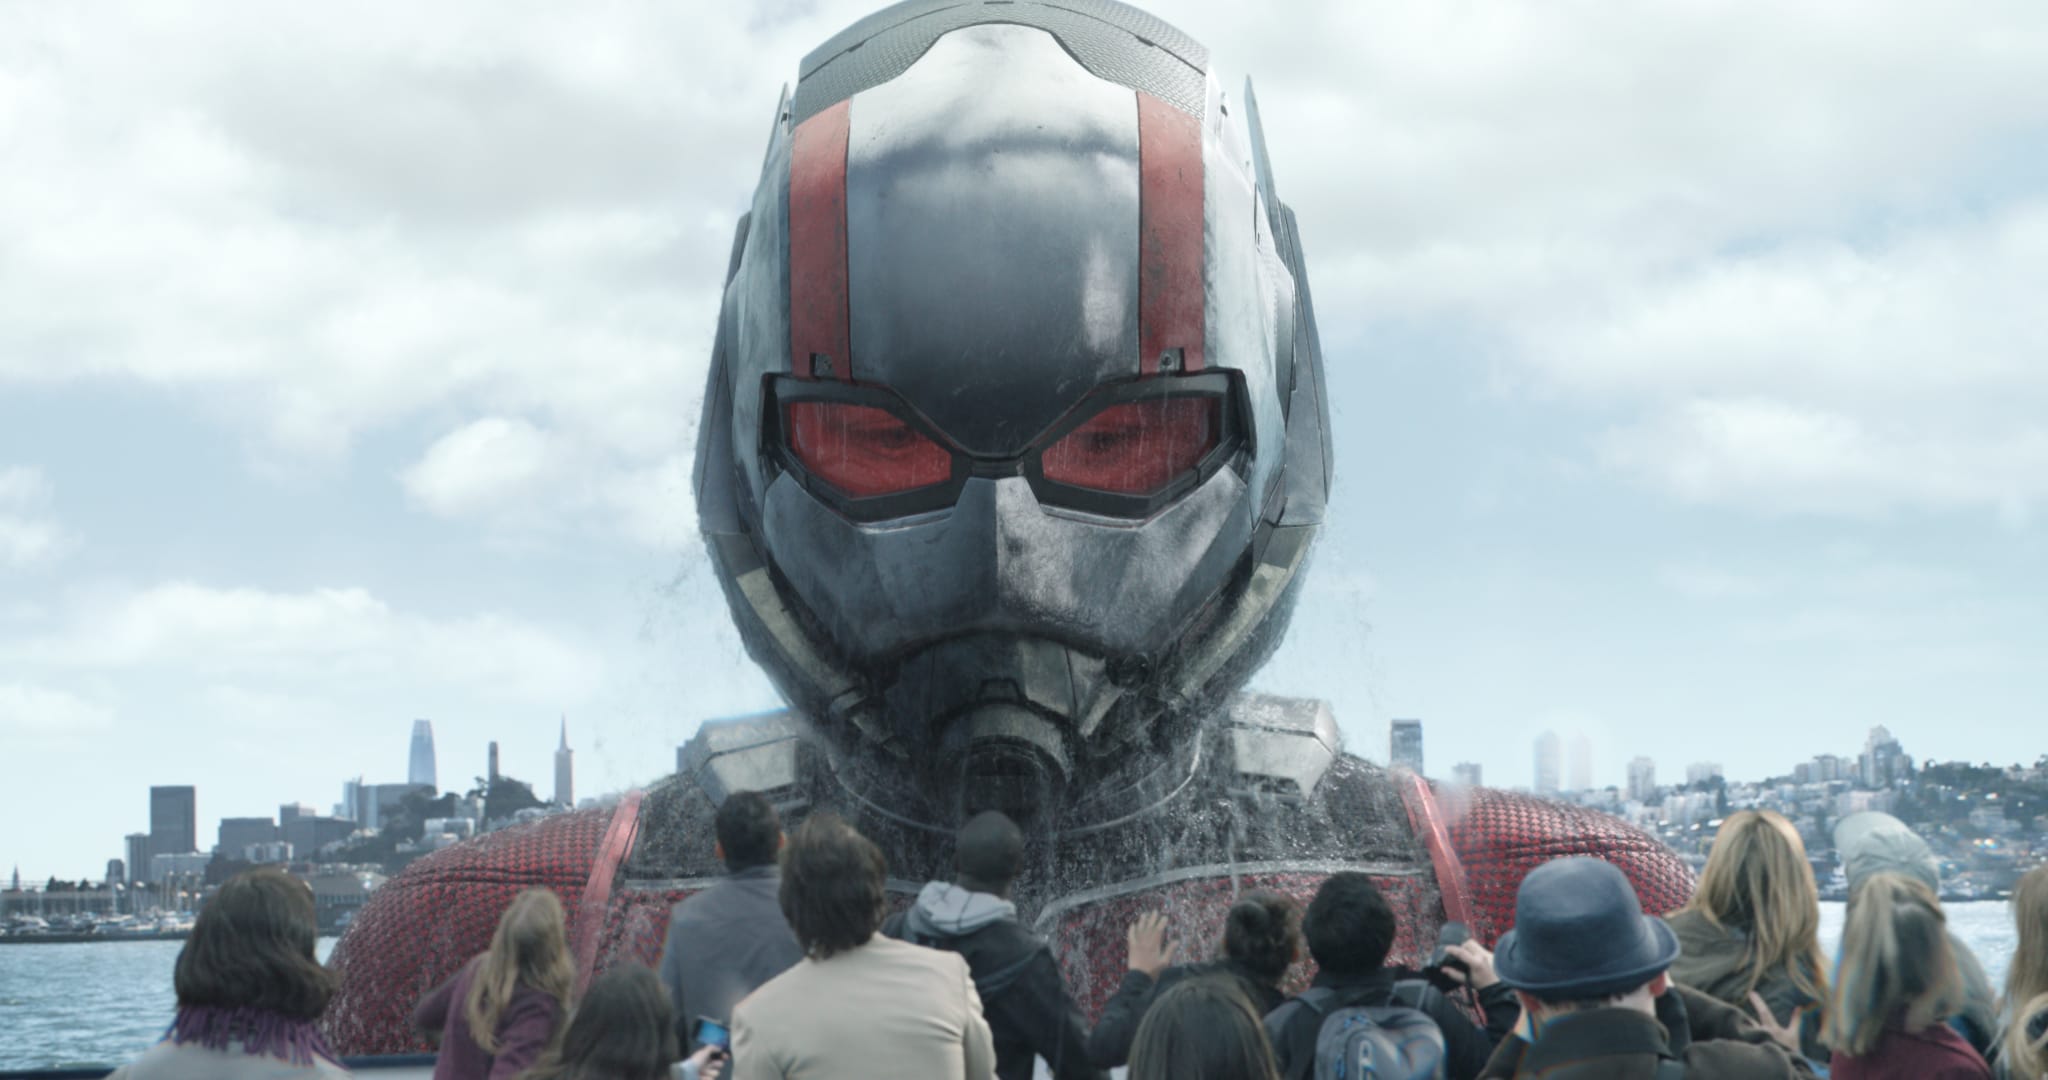 ANT-MAN AND THE WASP - Teaser Trailer & Poster Now Available!!! #AntManandWasp